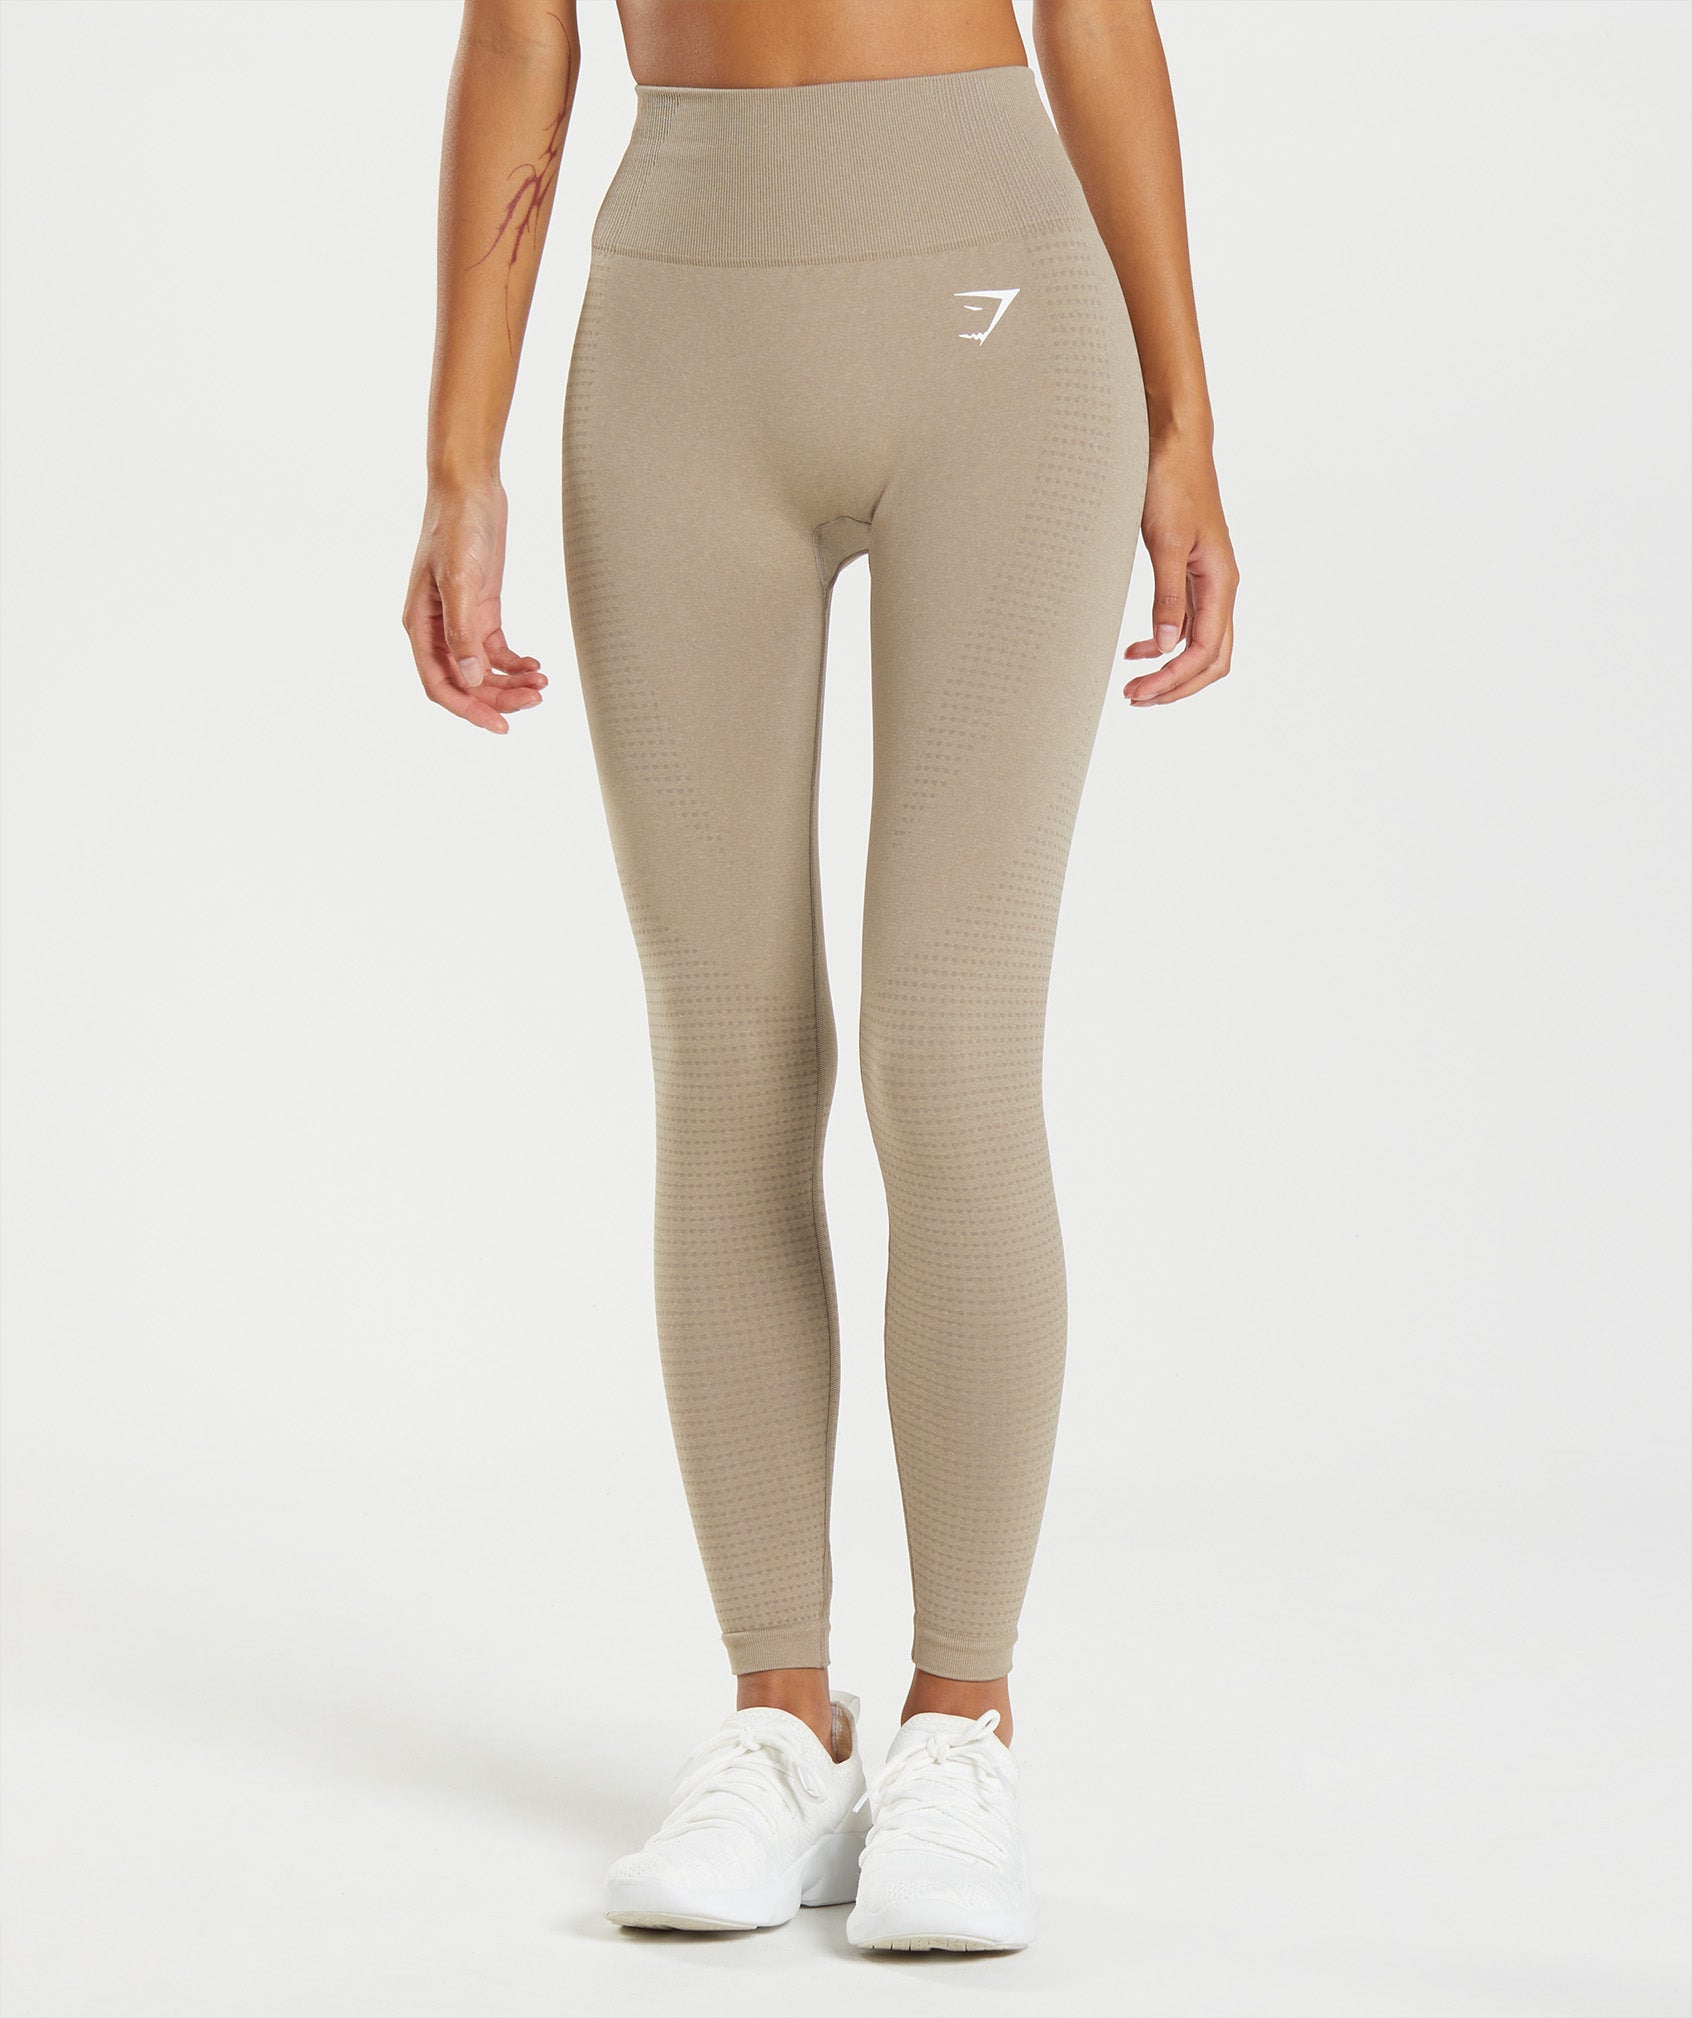 Vital Seamless 2.0 Leggings in {{variantColor} is out of stock